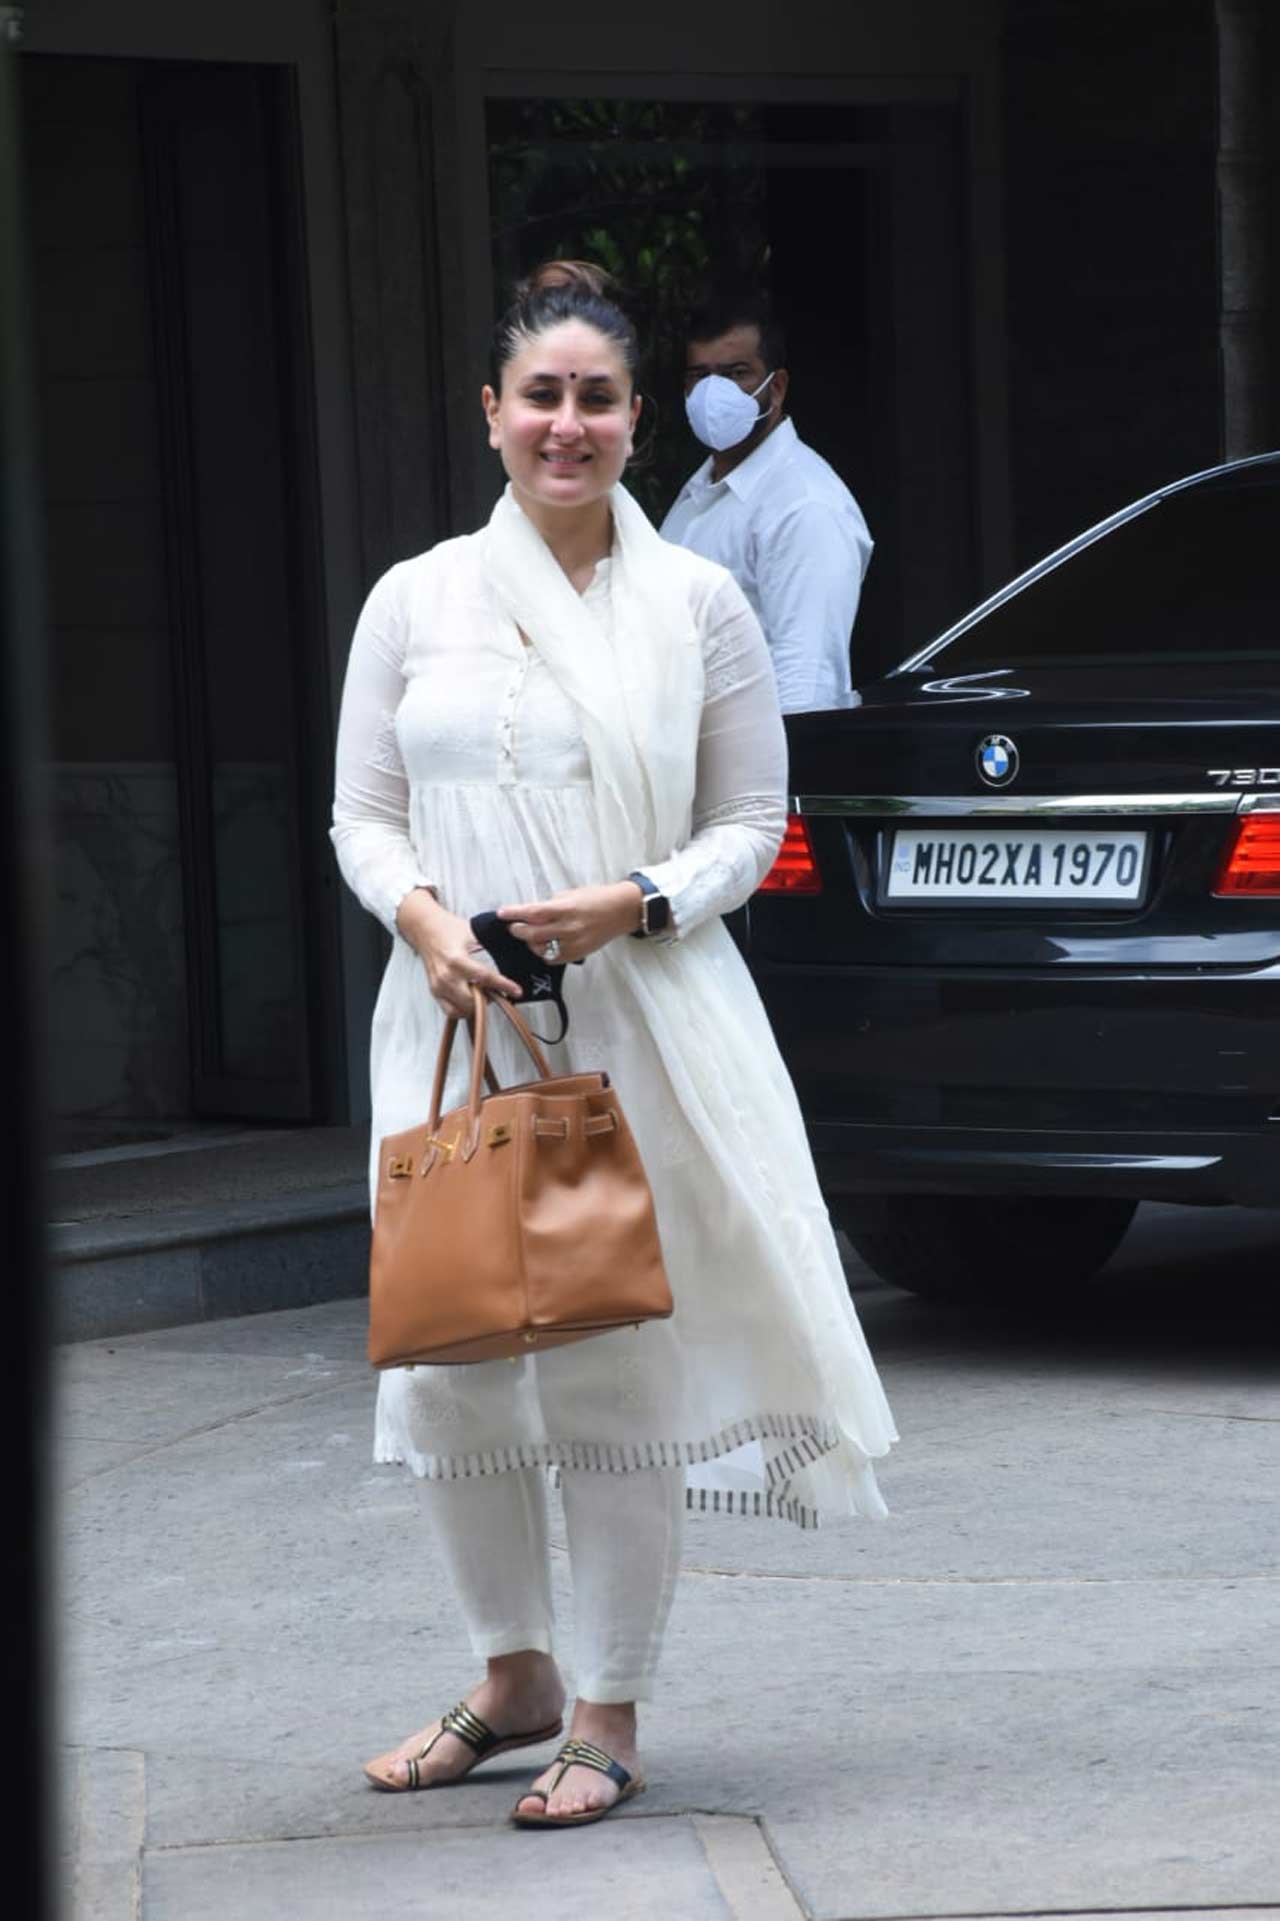 Kareena Kapoor Khan was spotted in a traditional avatar at her father Randhir Kapoor's new residence at Bandra. The actress slayed her look and flashed her smile as she posed for the flashbulbs. She's now gearing up for Laal Singh Chaddha and Takht. Takht will be Khan's second collaboration with Karan Johar where he directs the actress. This period drama, which was slated to release on December 24, 2021, has now been postponed. It also stars Anil Kapoor, Ranveer Singh, Vicky Kaushal, Alia Bhatt, Bhumi Pednekar, and Janhvi Kapoor.